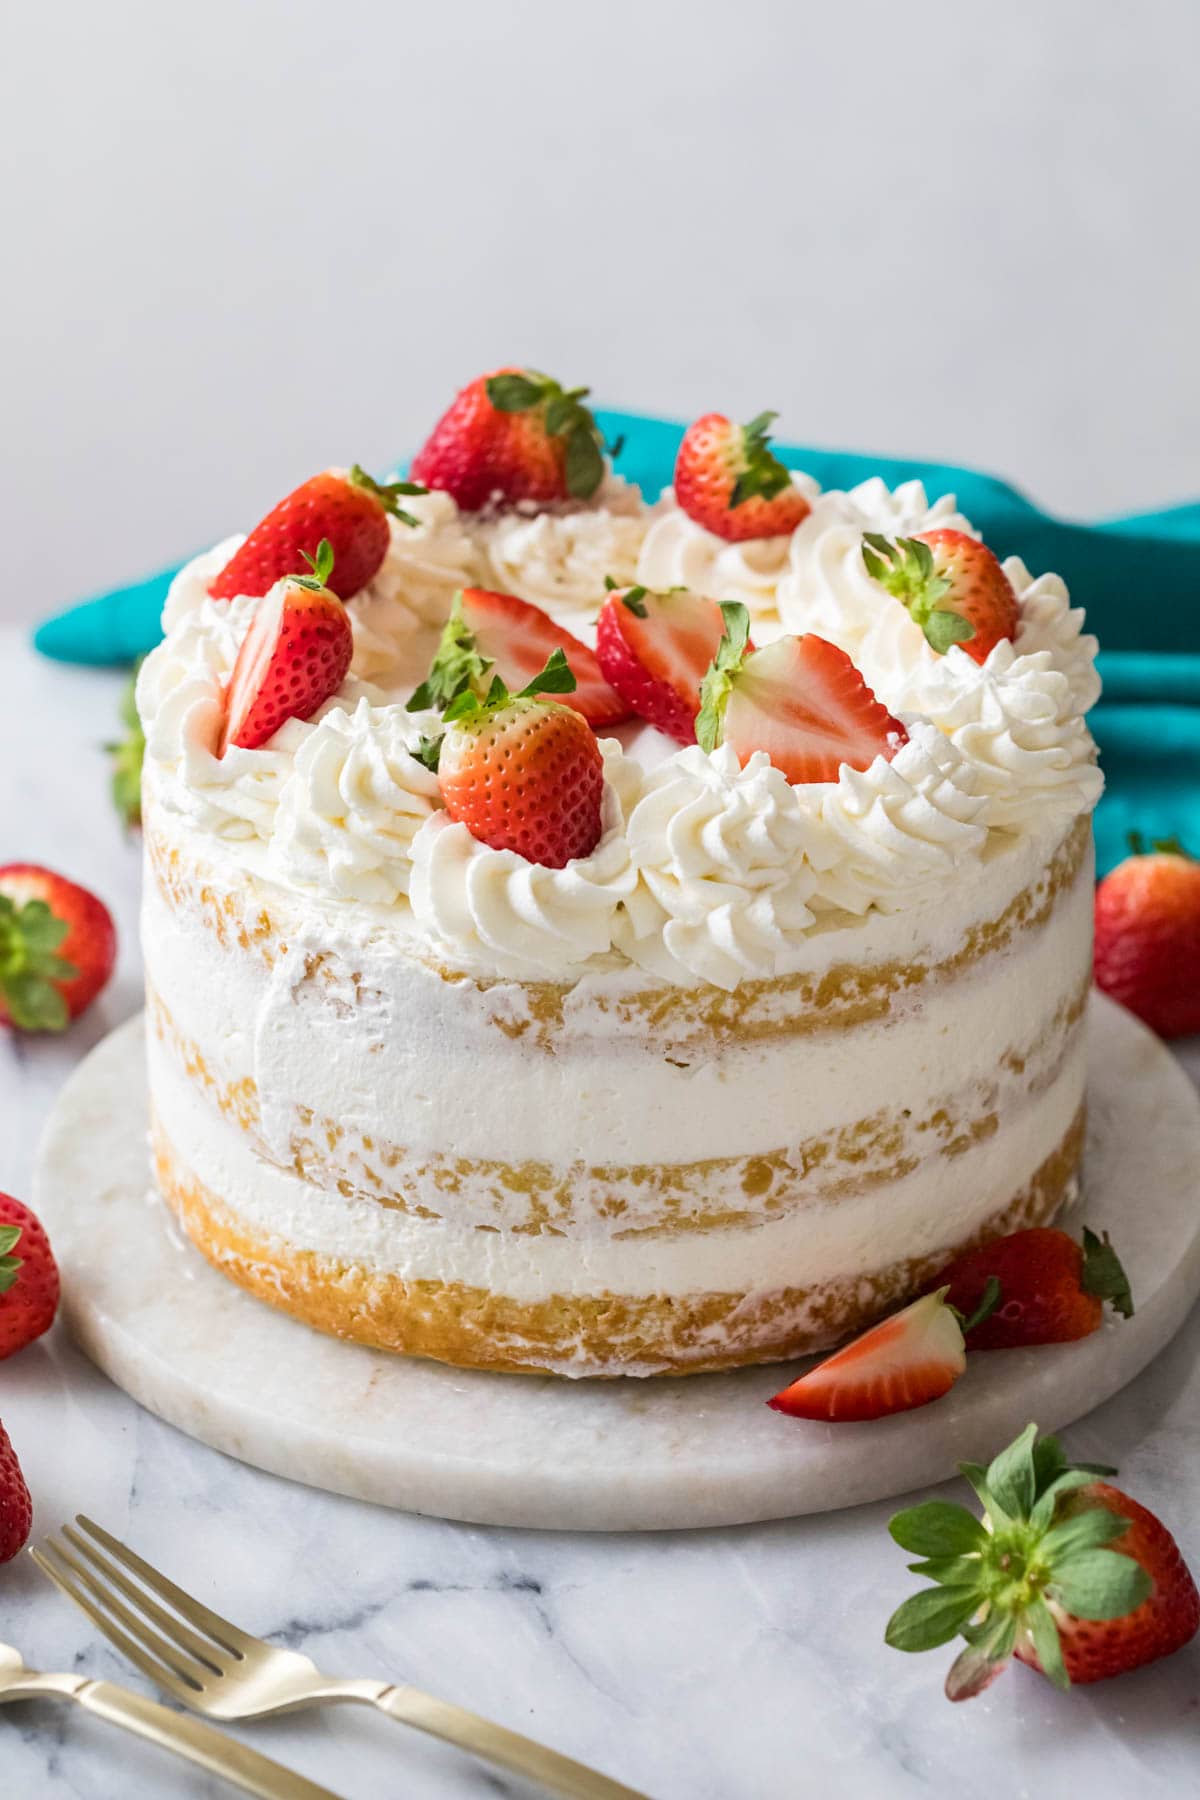 Strawberry shortcake cake decorated with whipped cream frosting and fresh berries.